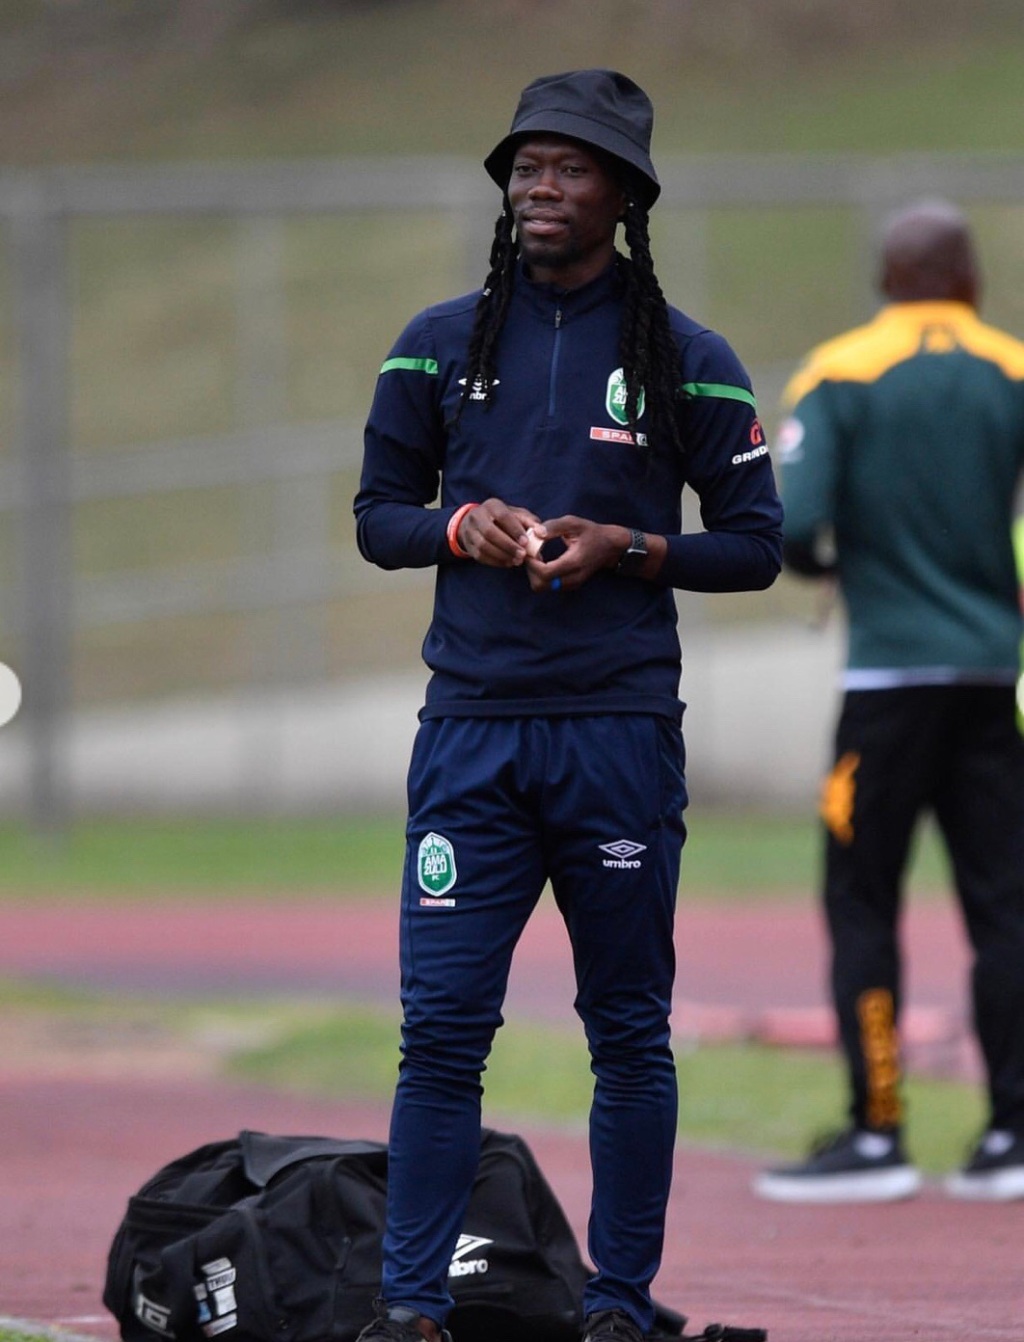 Reneilwe “Yeye” Letsholonyane: A Journey from Player to Coach